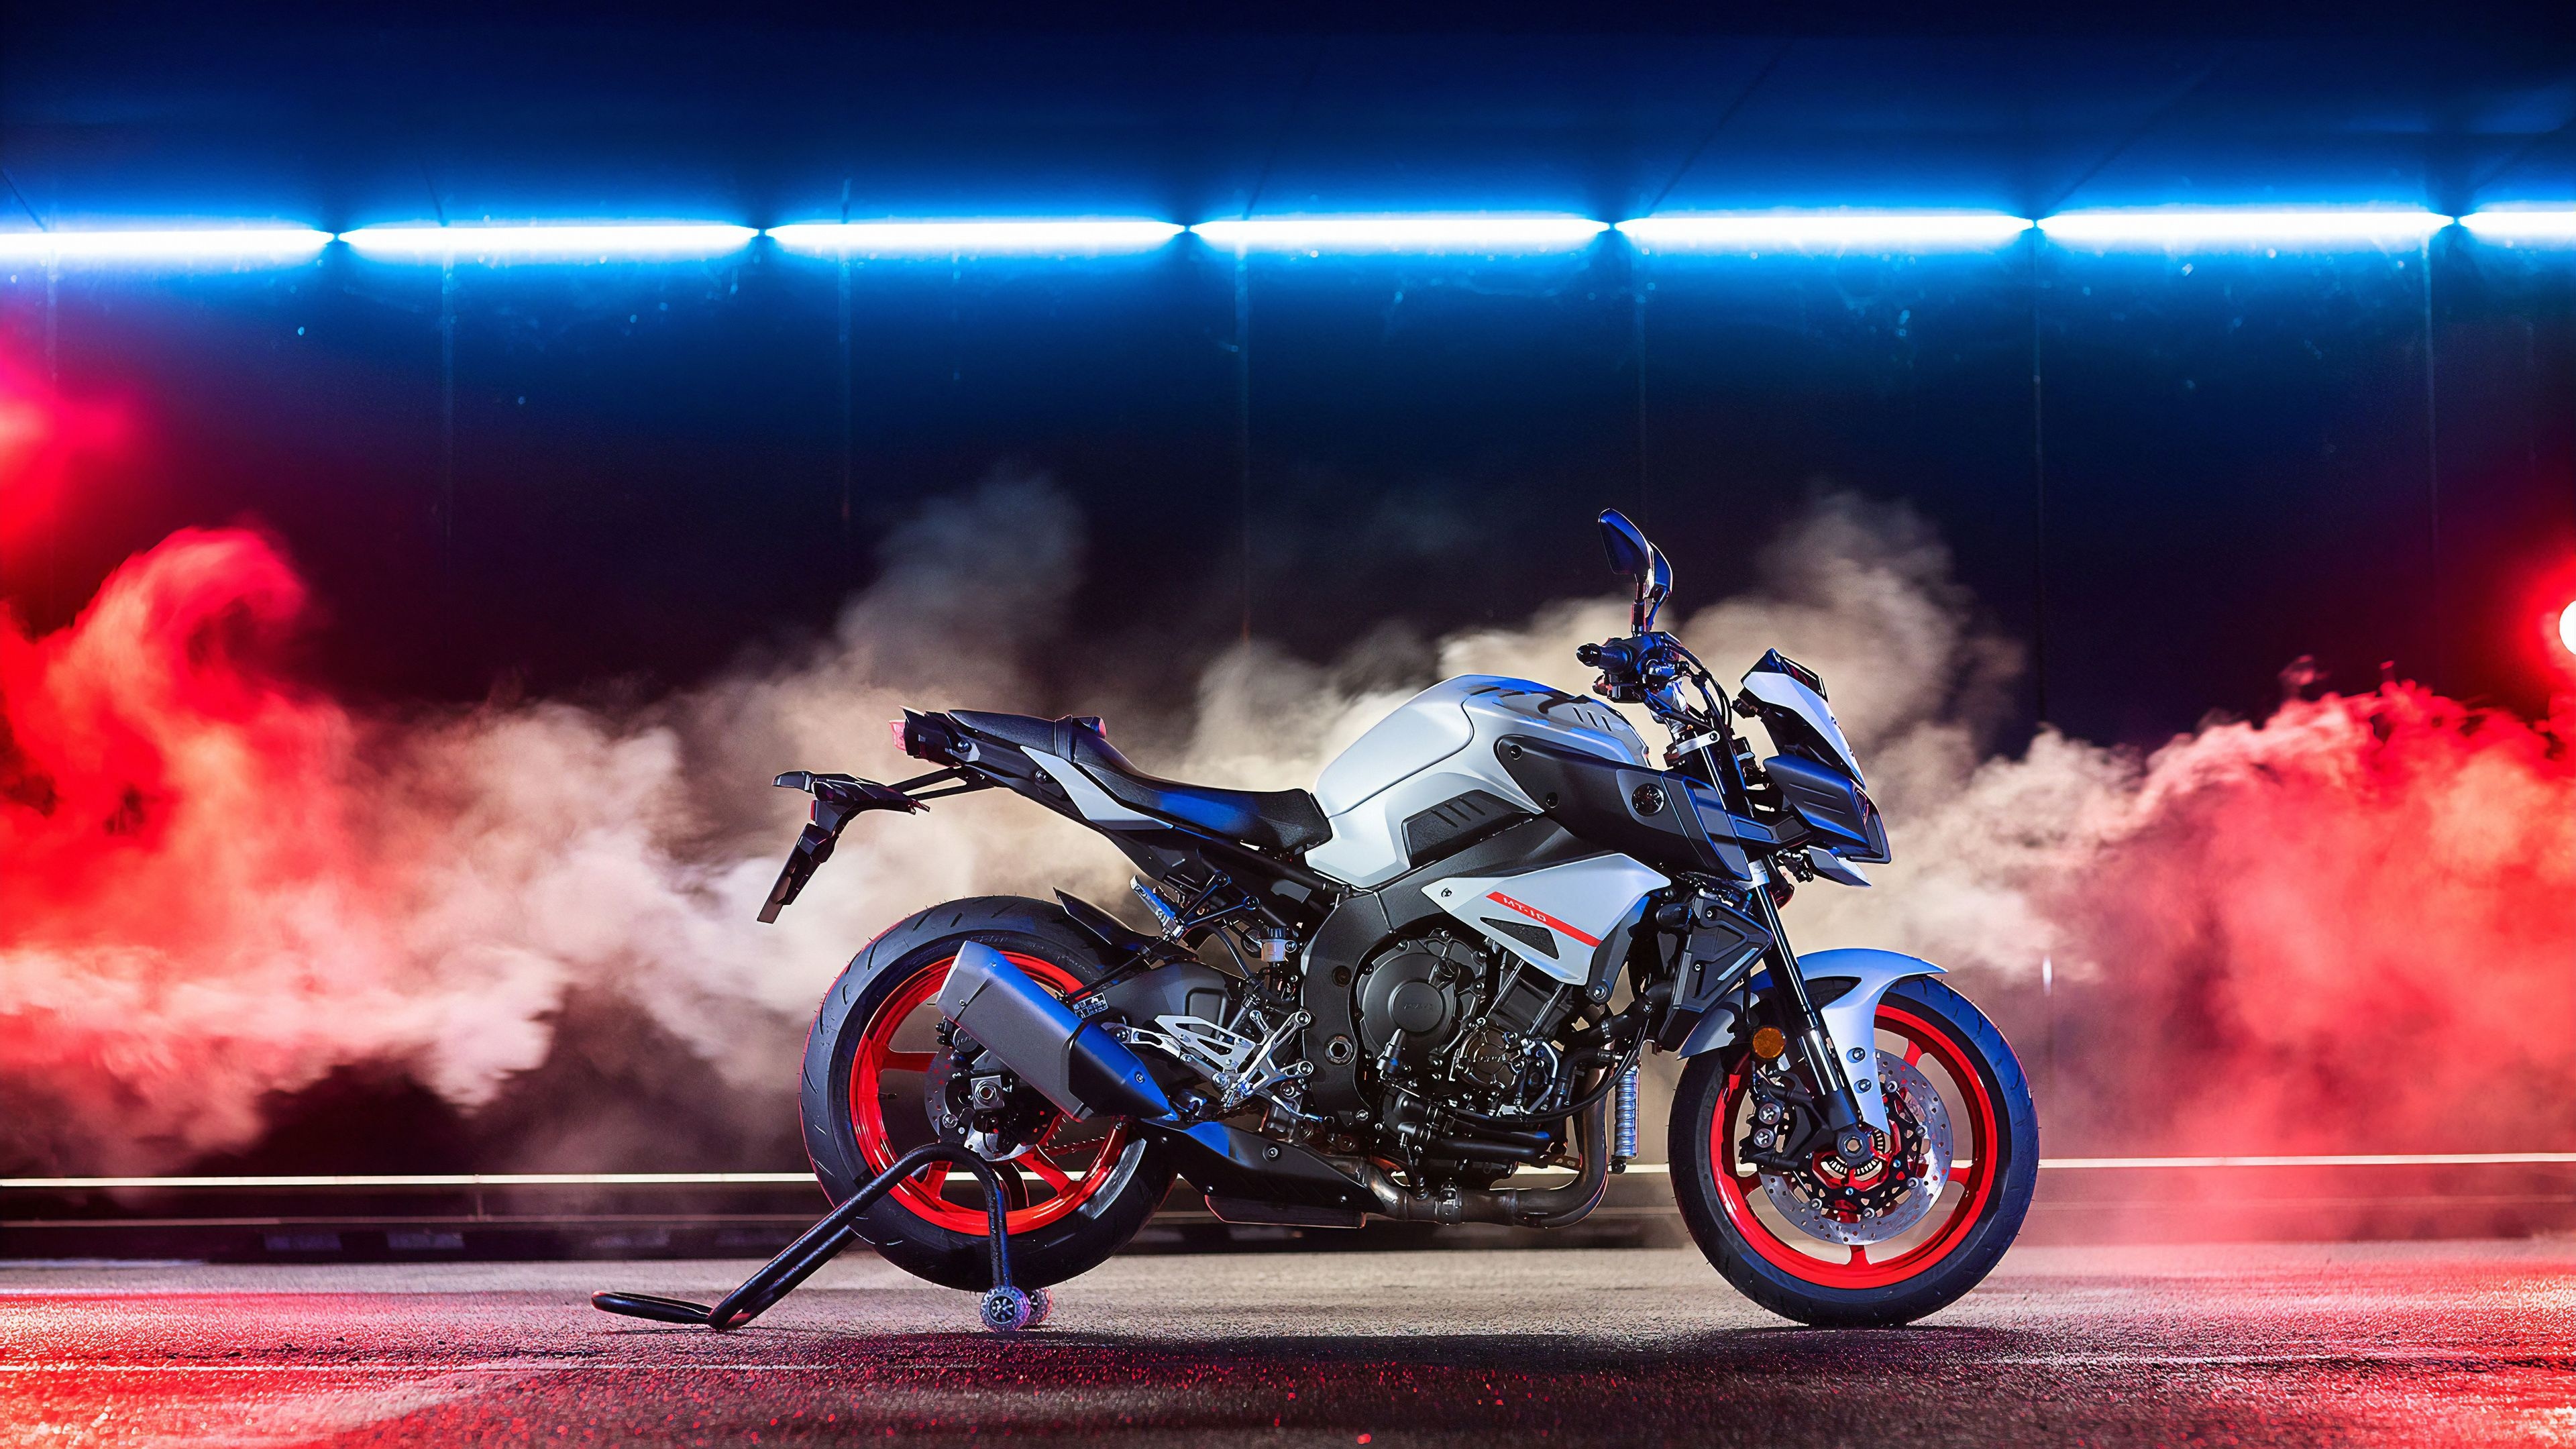 Yamaha MT-10, High-definition wallpapers, Powerful street fighter, Exceptional performance, 3840x2160 4K Desktop